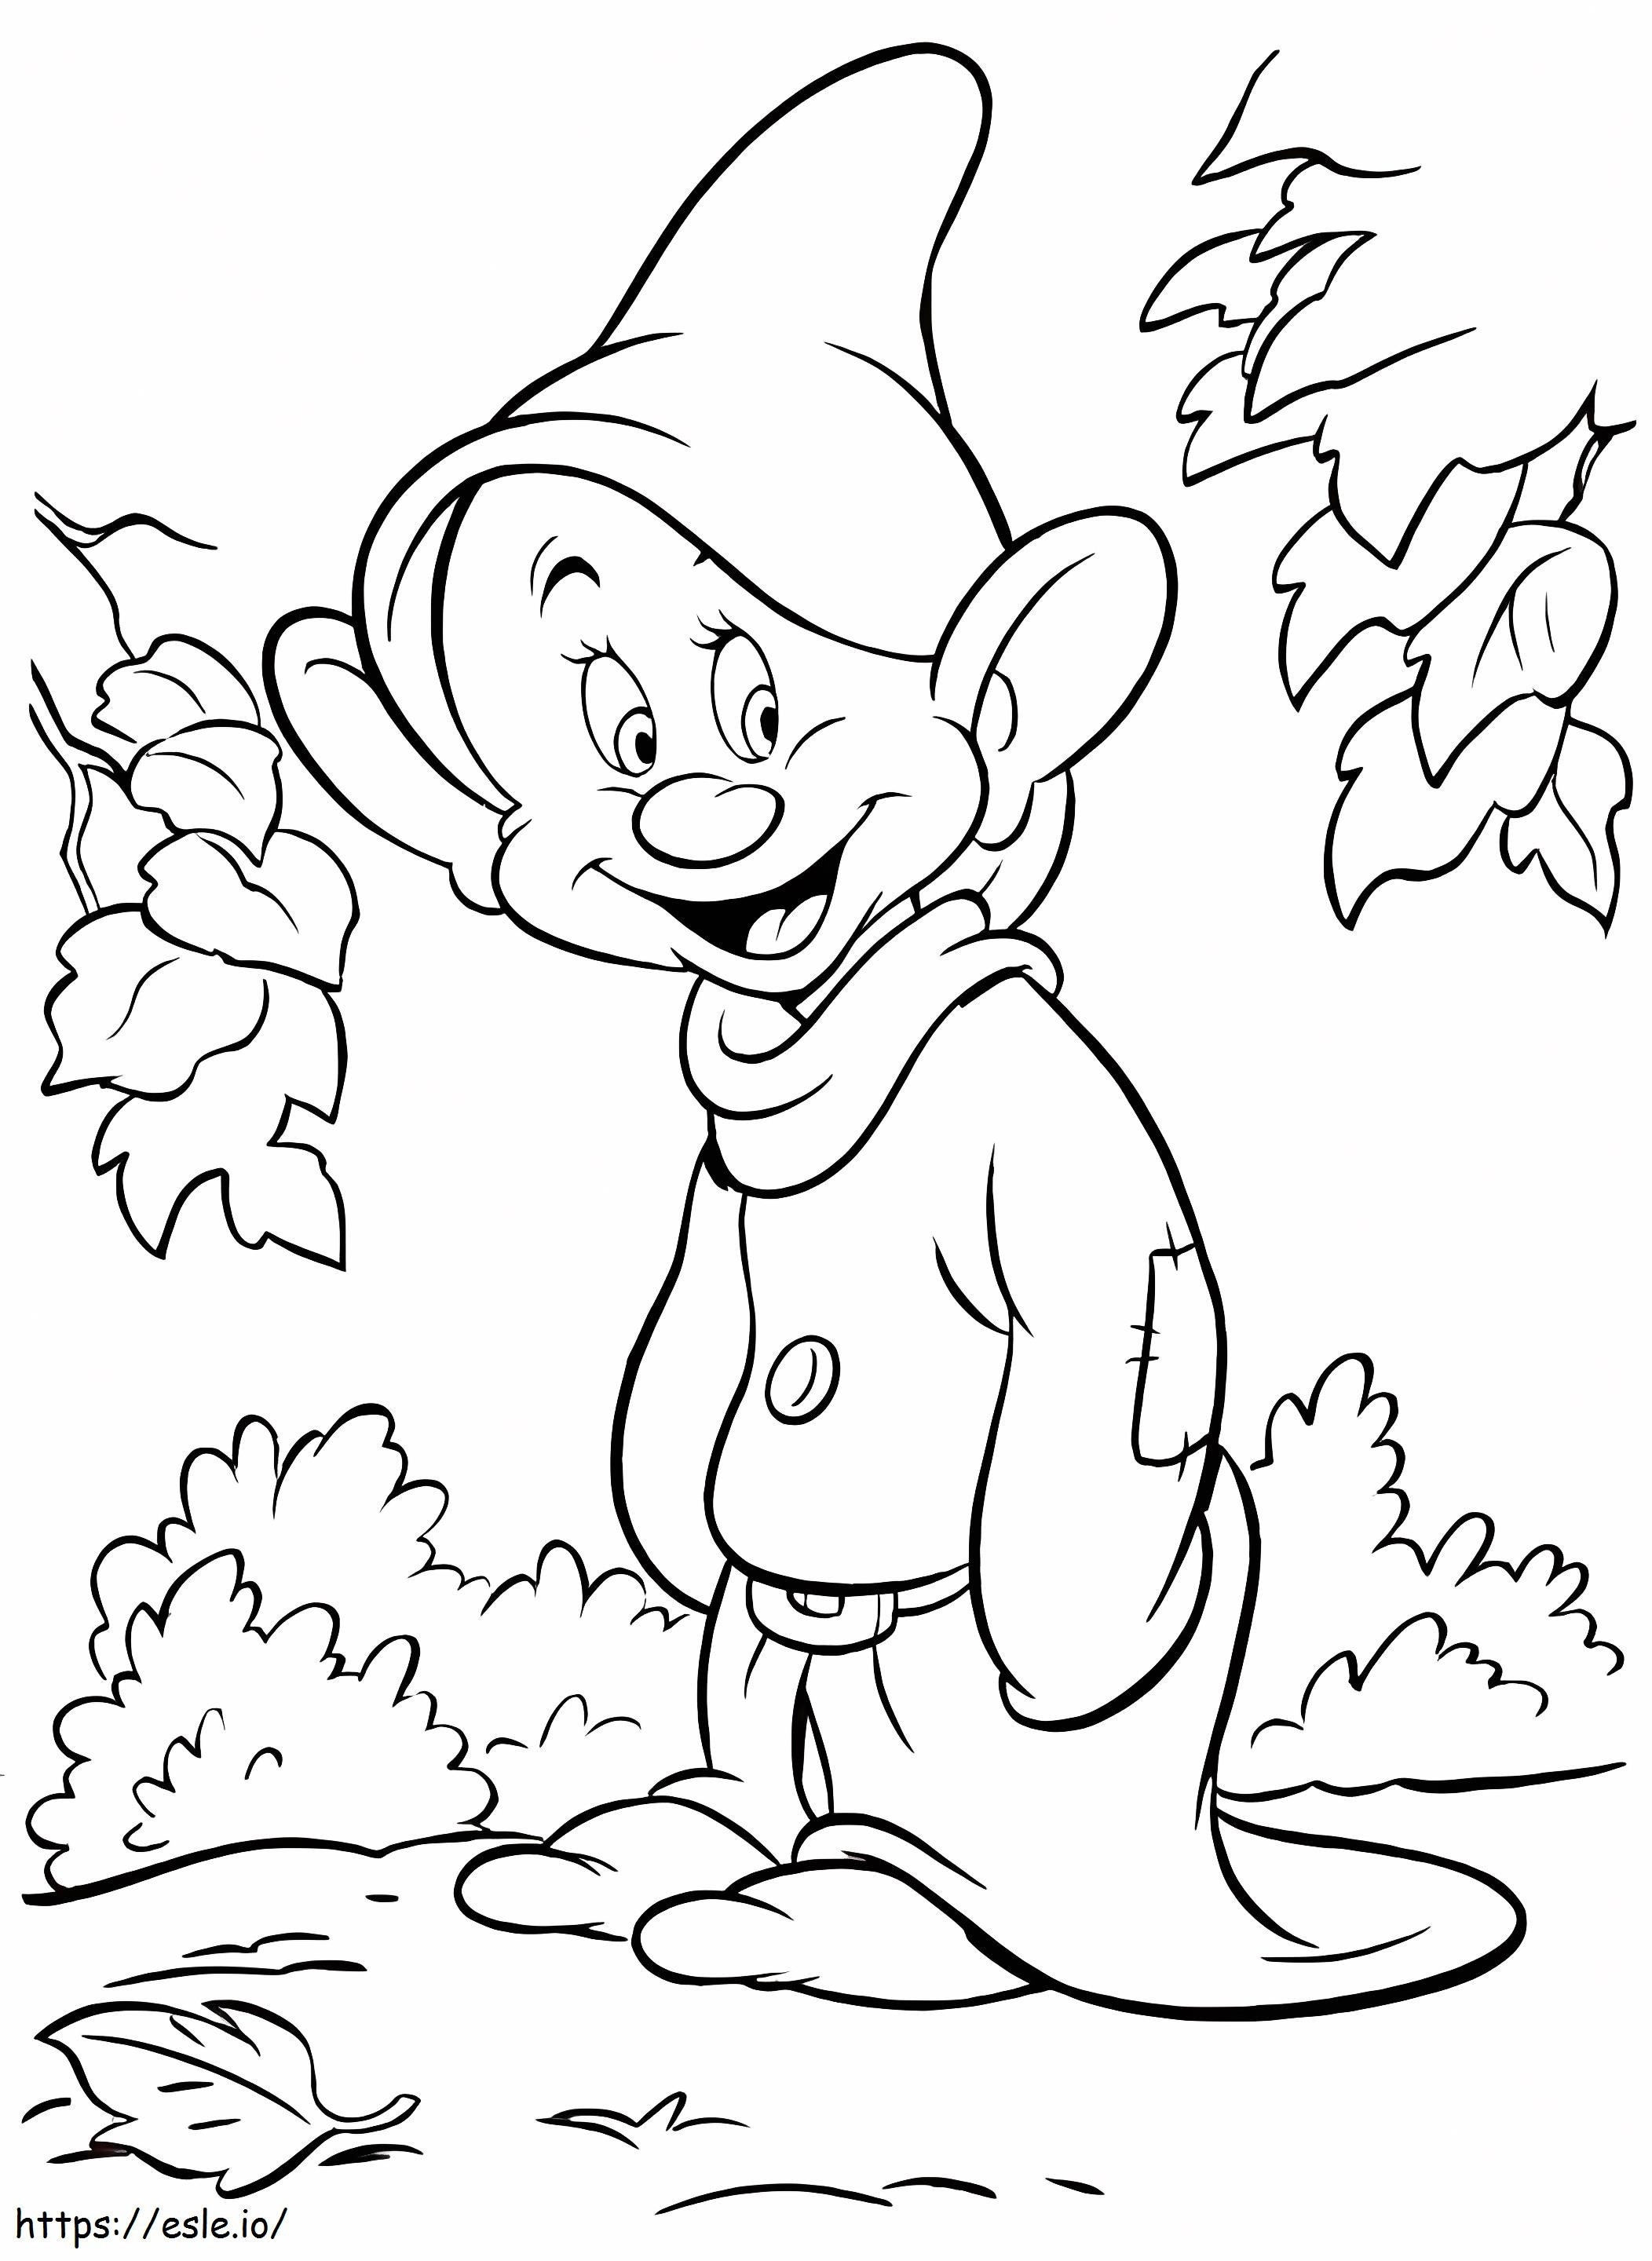 Dopey Dwarf coloring page